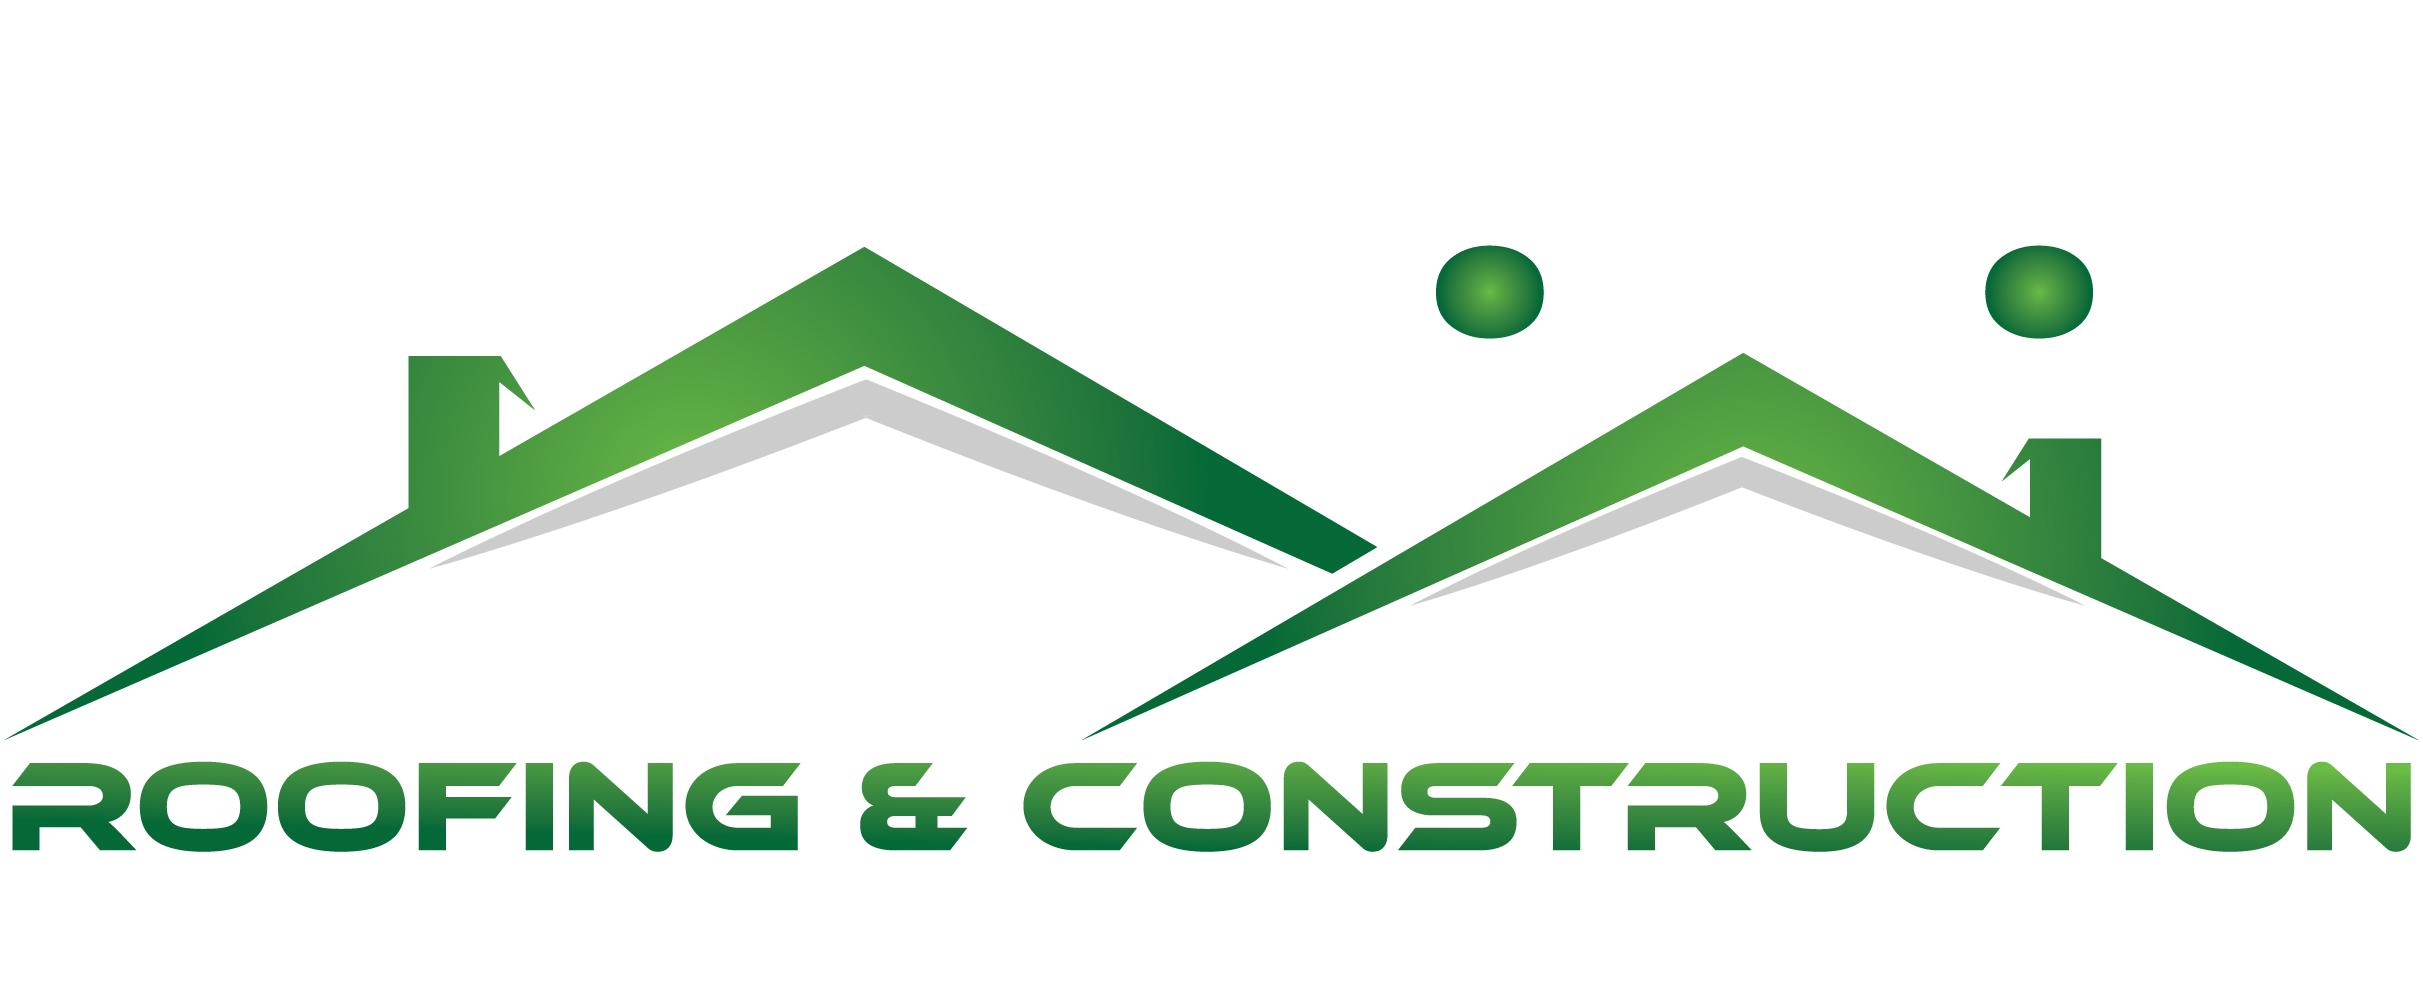 A.P. Roofing & Construction